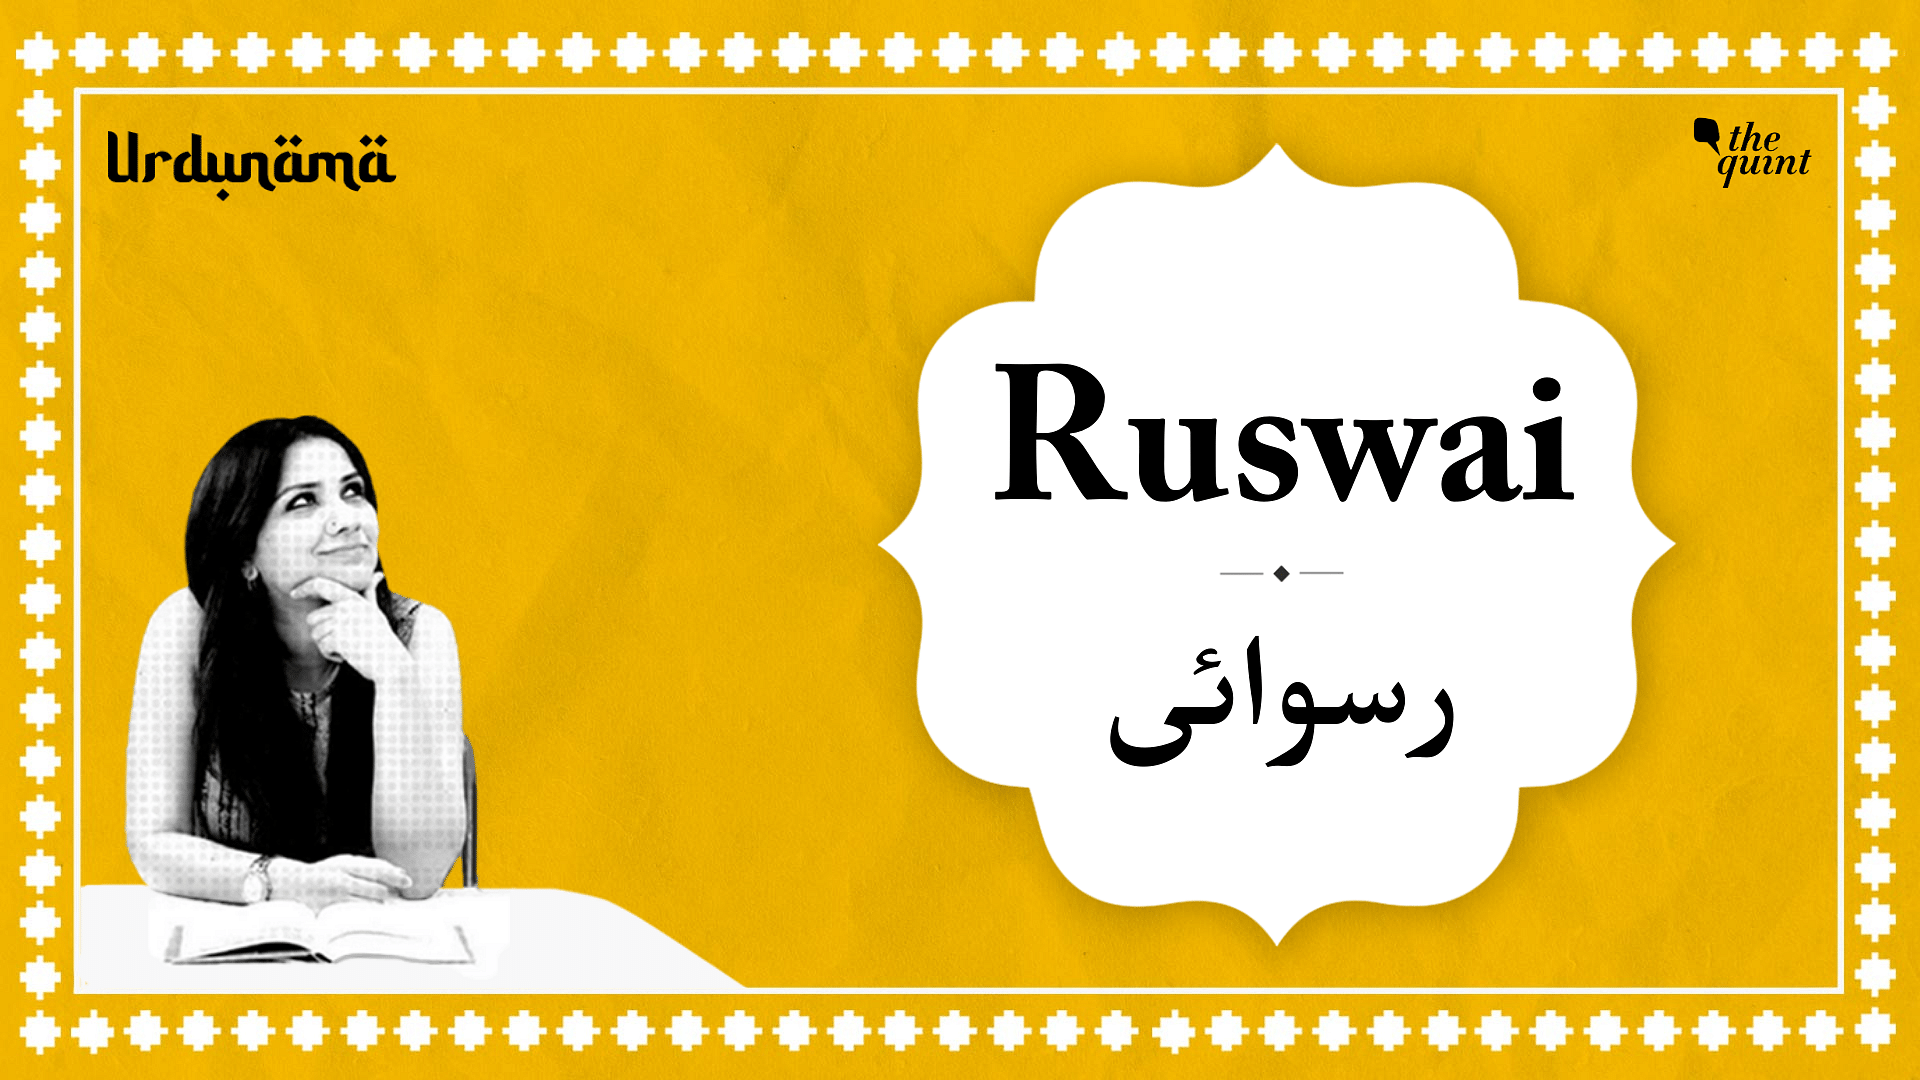 Ruswai meaning